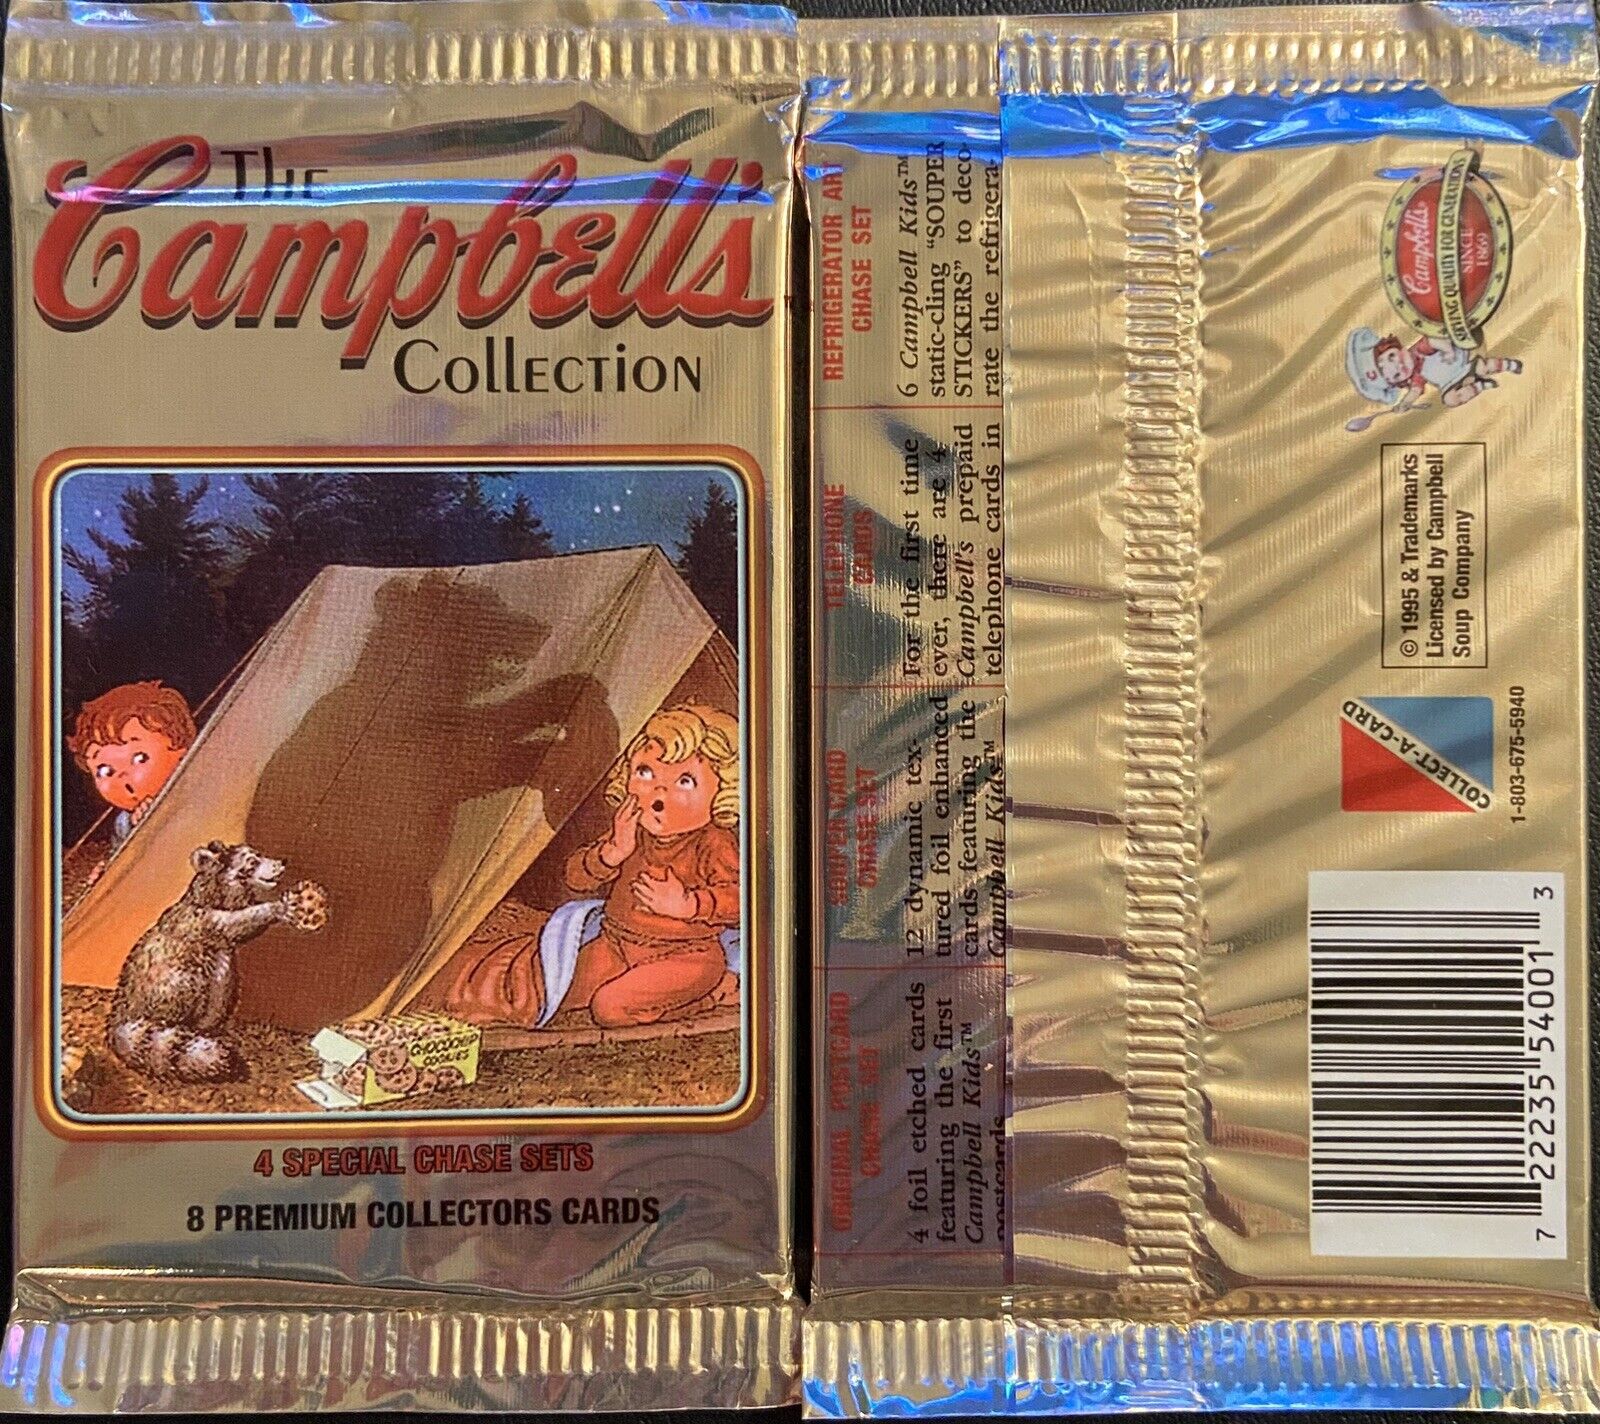 1995 The Campbells Collection 8 Premium Cards (Lot of 18 Packs) - Miraj Trading